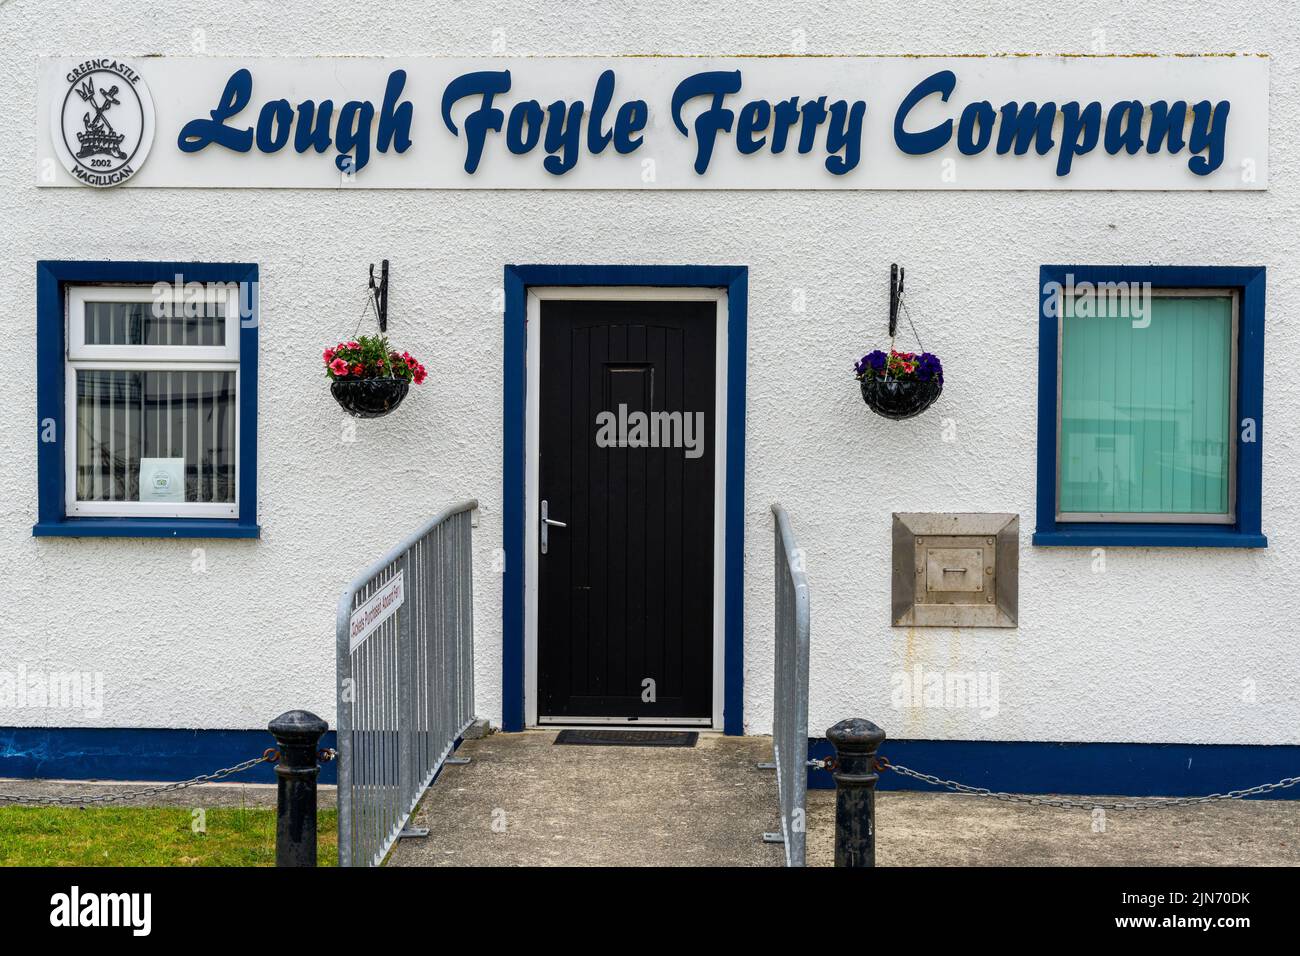 Greencastle, Ireland - 9 July, 2022: view of the Lough Foyle Ferry Company building and headquarters in Greencastle Stock Photo